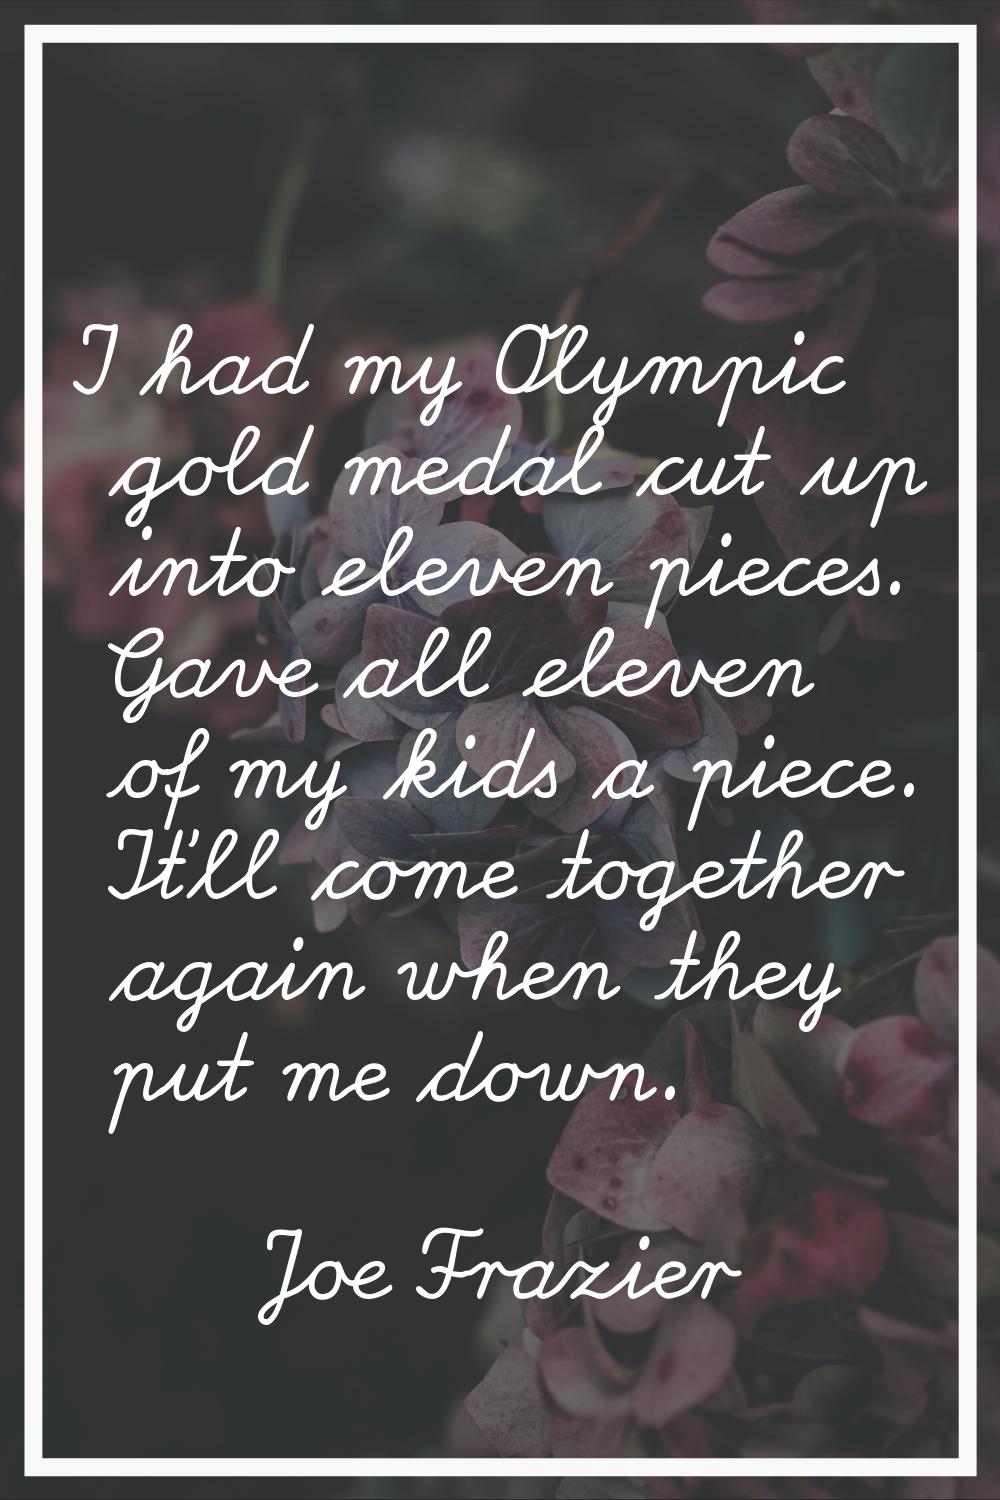 I had my Olympic gold medal cut up into eleven pieces. Gave all eleven of my kids a piece. It'll co